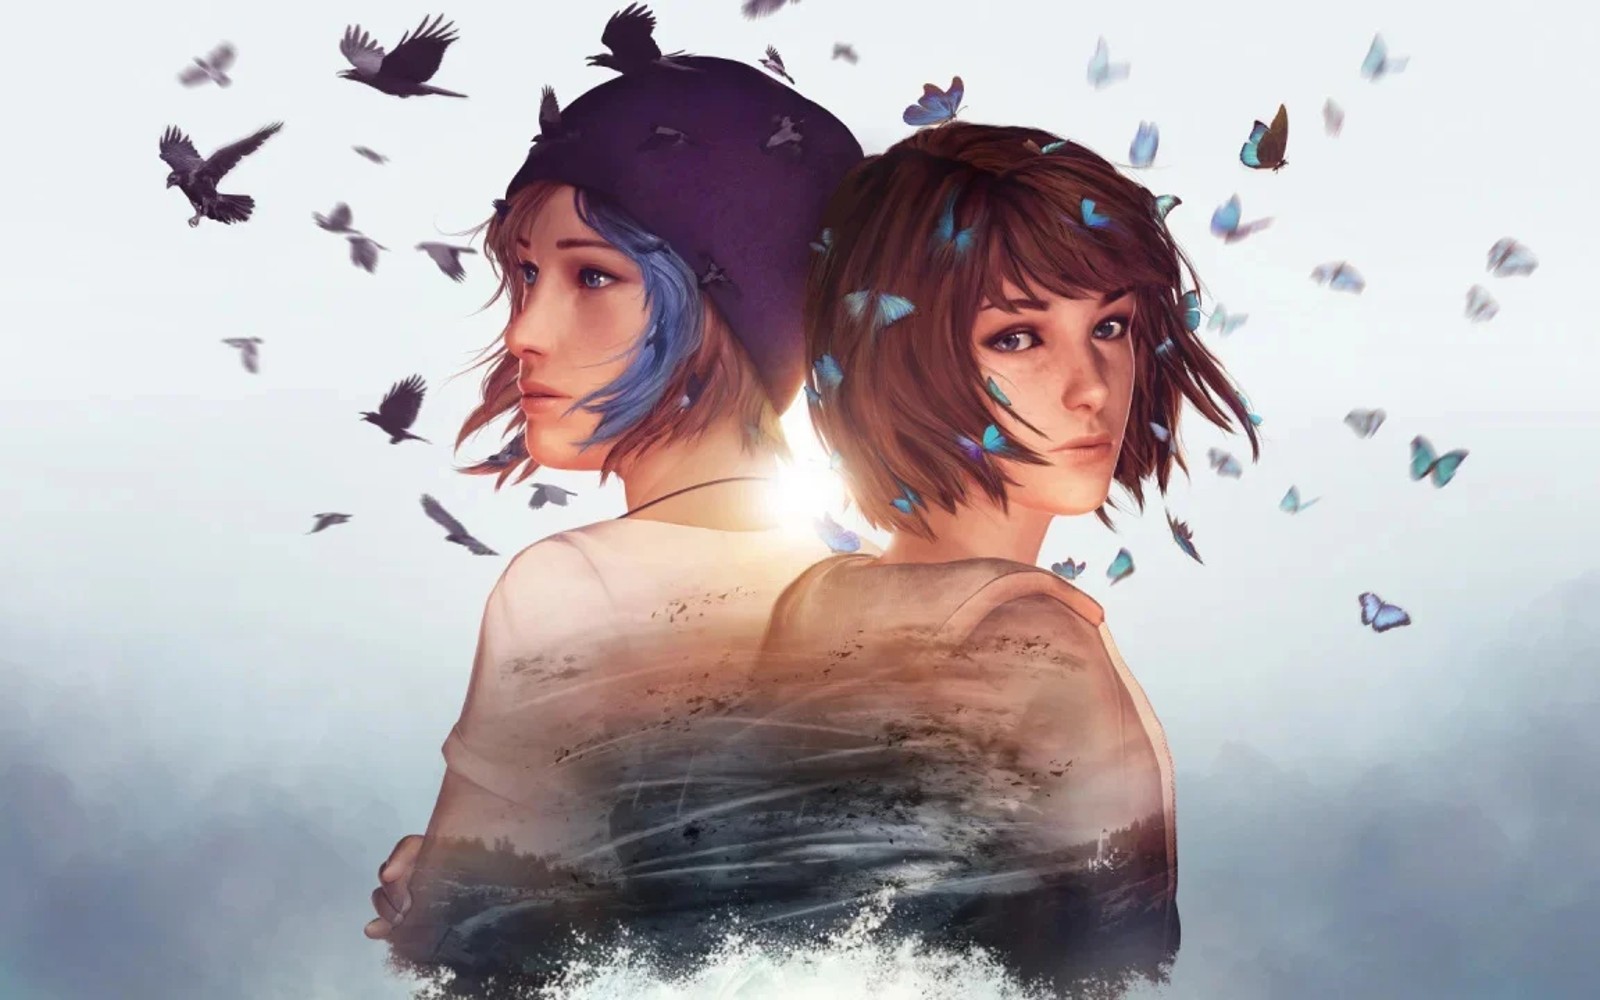 Life is Strange remaster collection for the Switch arrives on September 27th